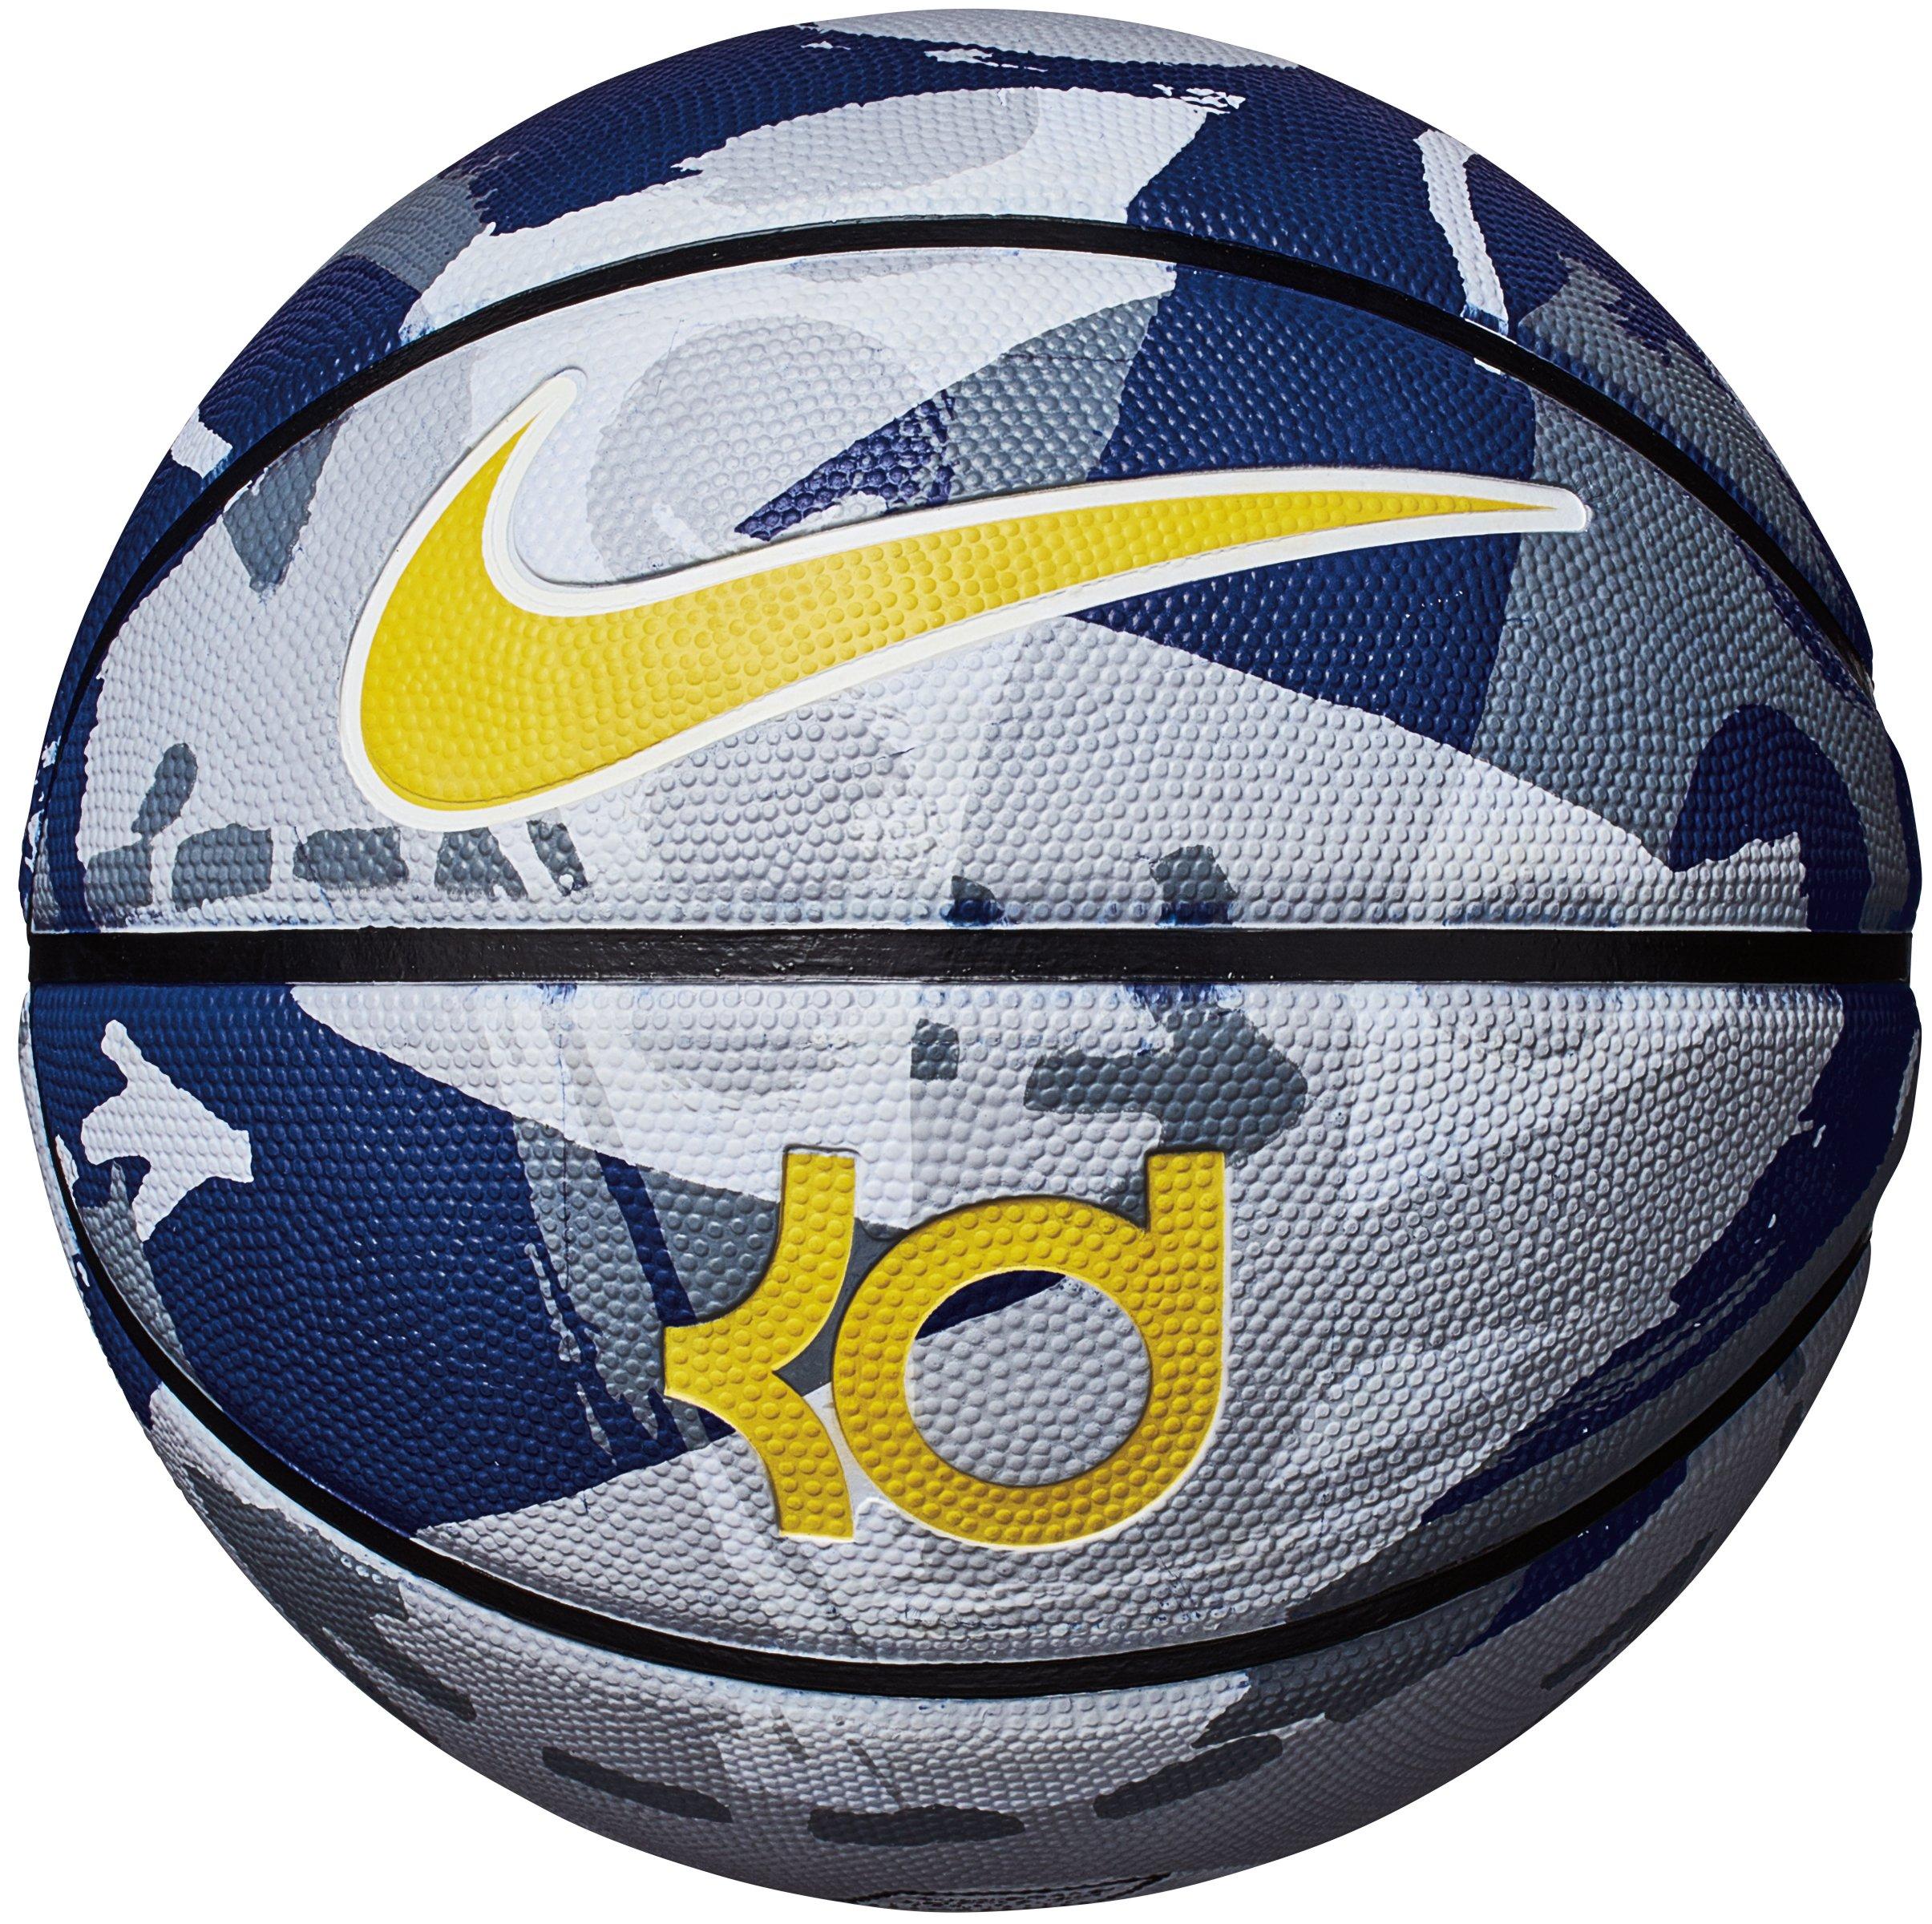 nike kd playground official basketball